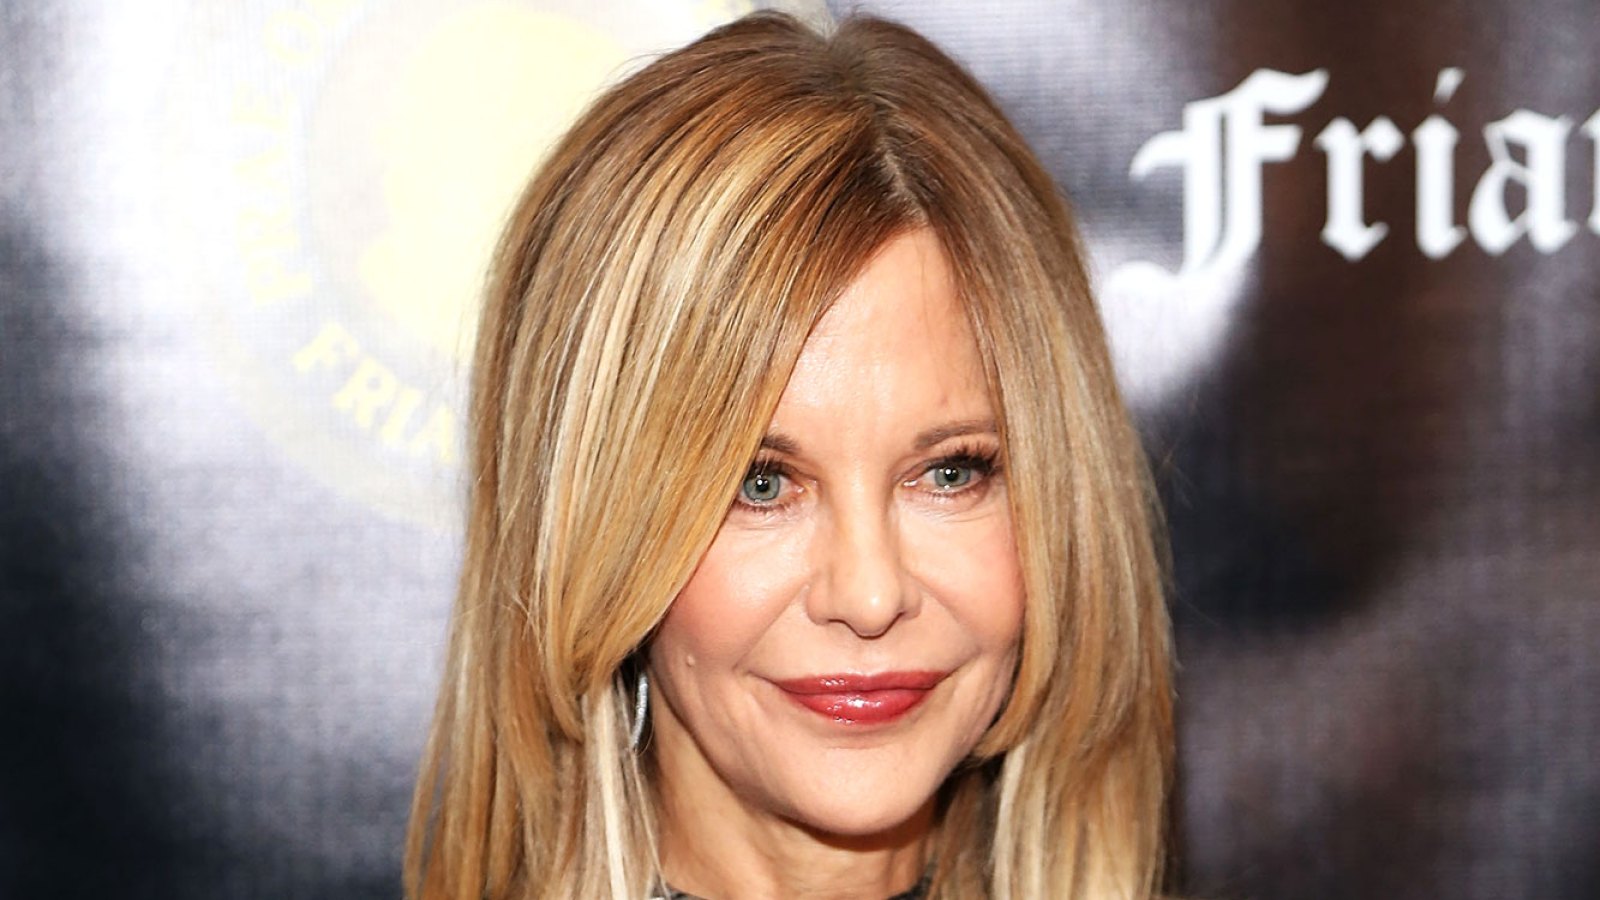 Rom-Com Queen Meg Ryan Is Writing Her Own Romantic Comedy Following Hollywood Hiatus